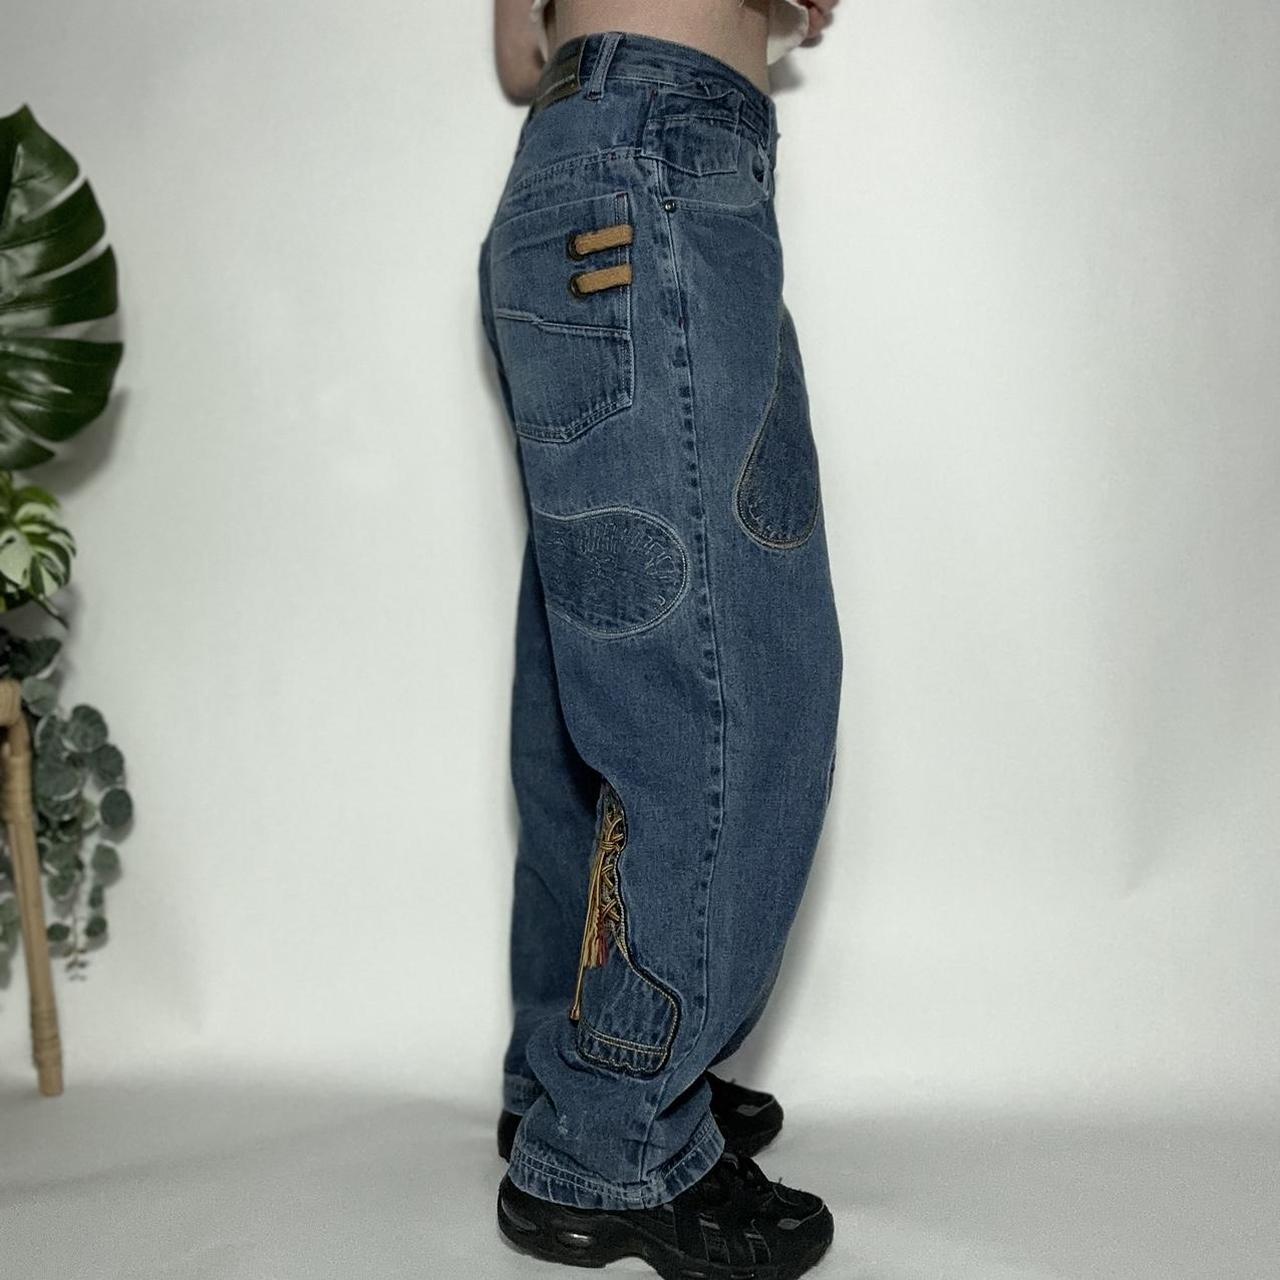 Vintage 90s Raw Blue baggy jeans with Timberland boot graphic